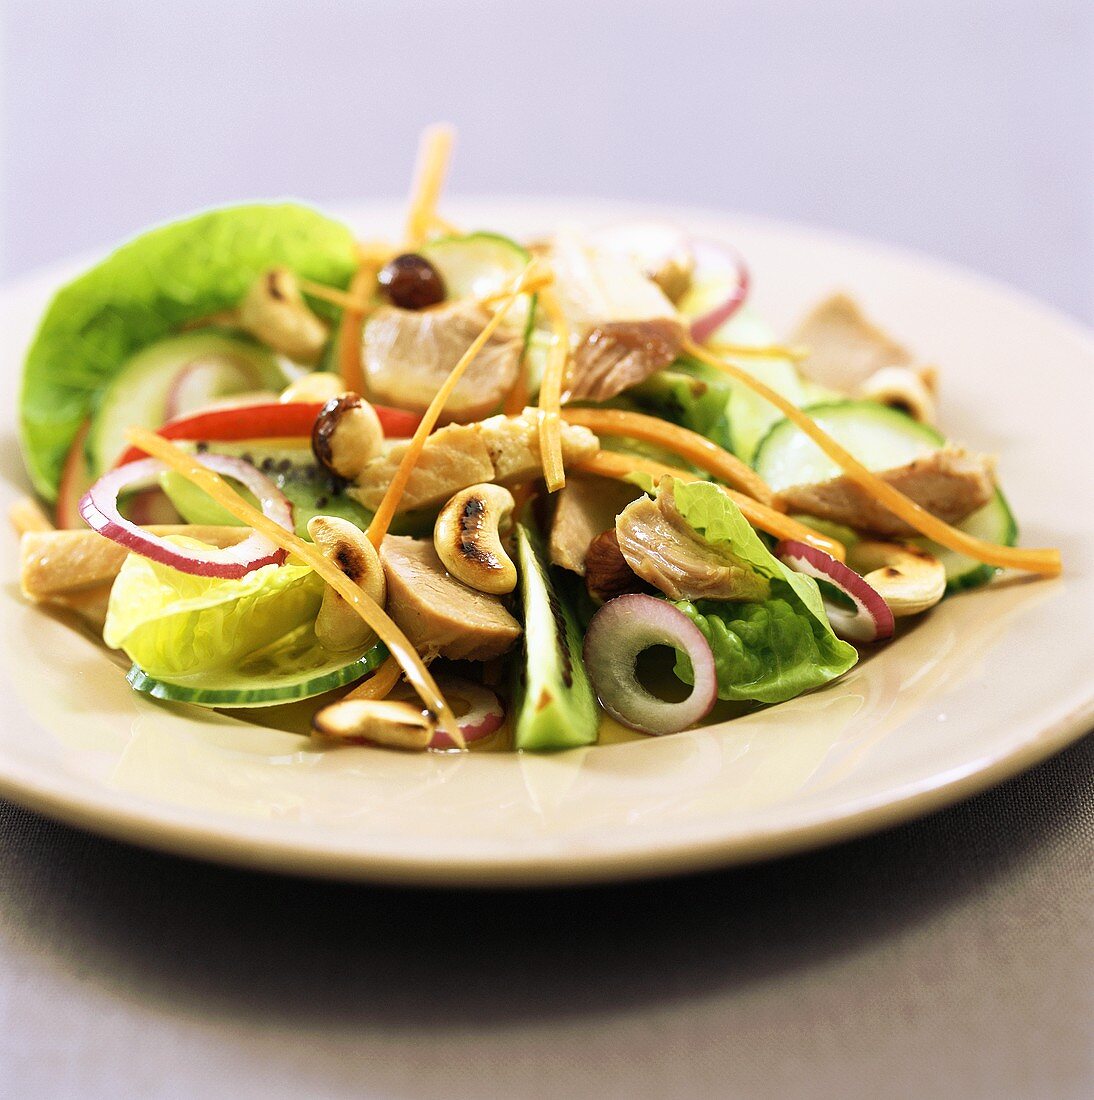 Salad with turkey and cashew nuts